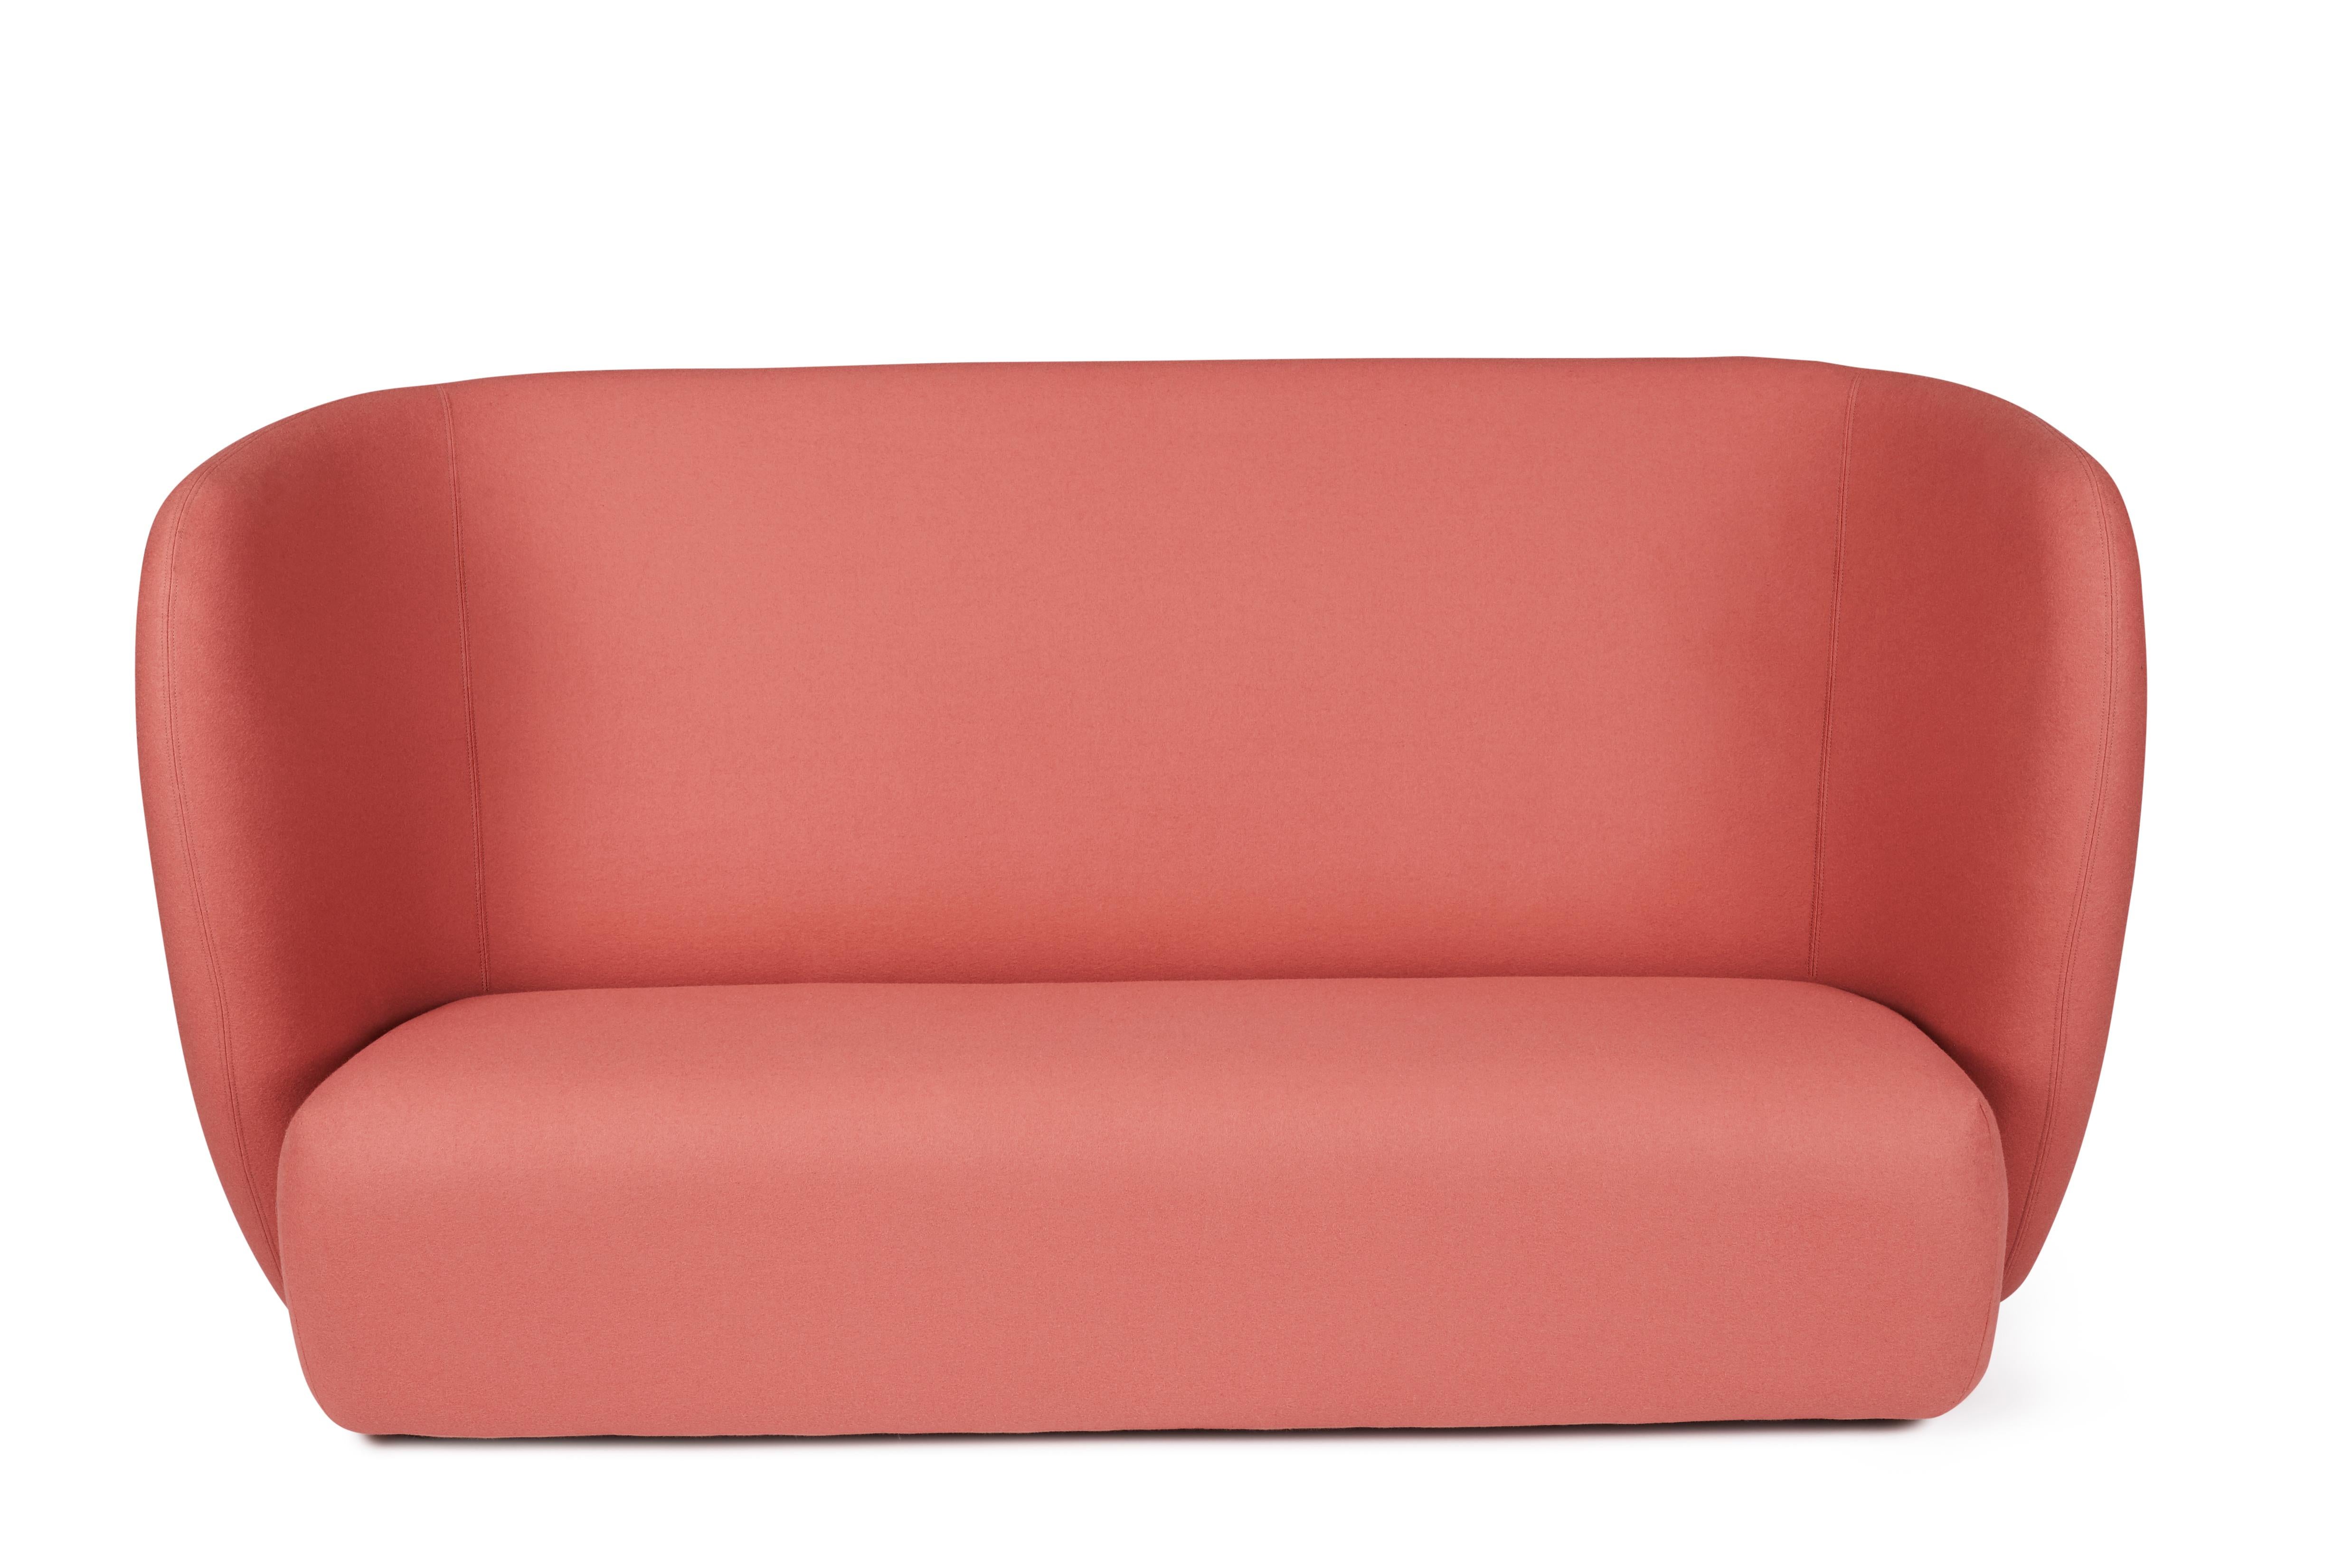 For Sale: Pink (Hero 541) Haven 3-Seat Sofa, by Charlotte Høncke from Warm Nordic